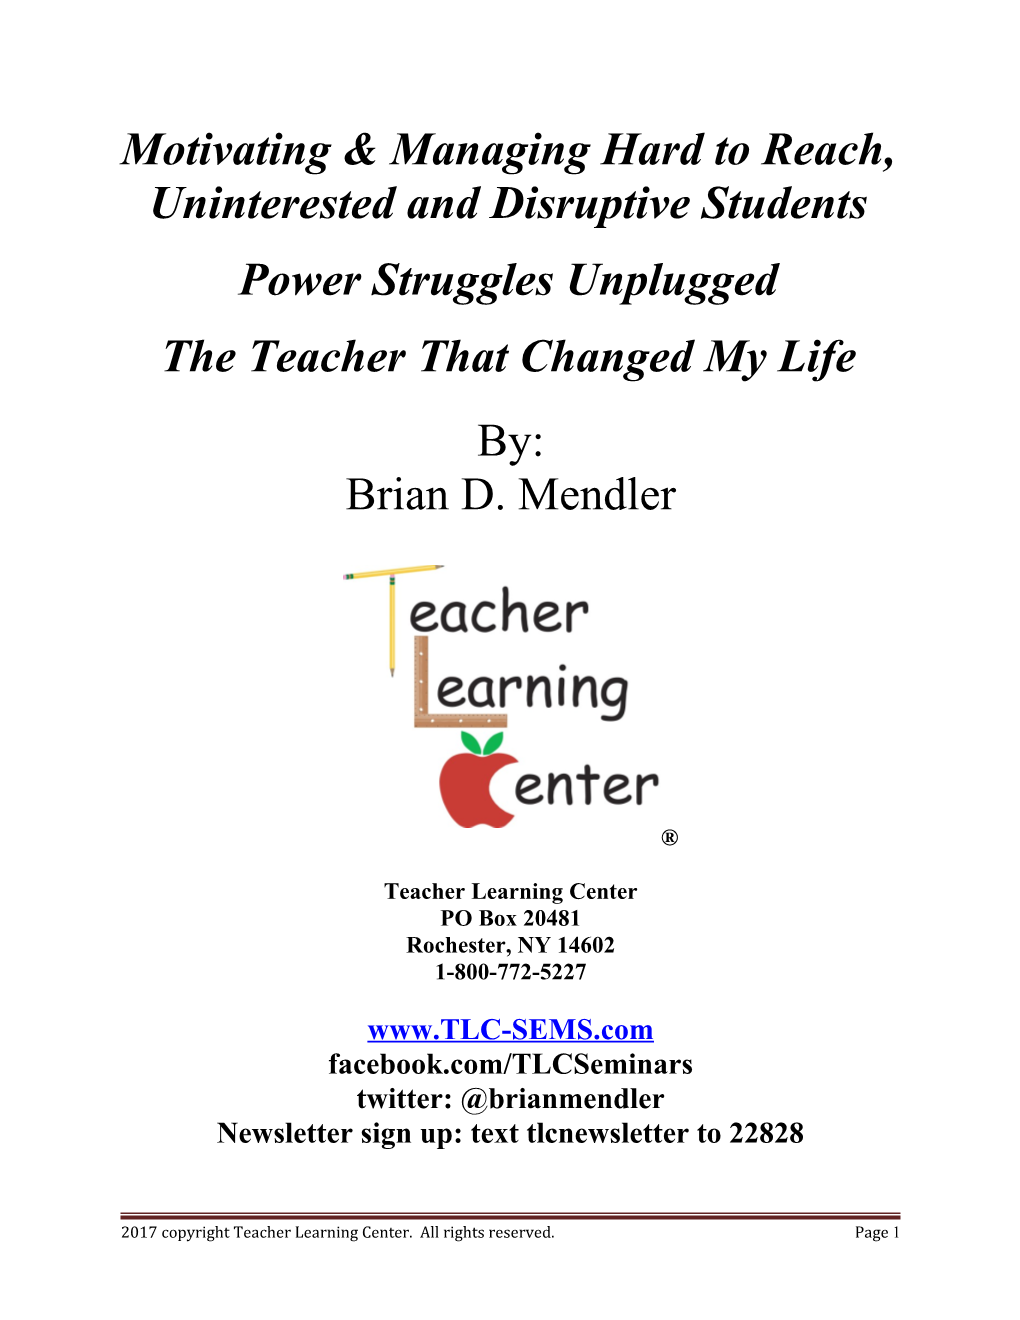 Motivating & Managing Hard to Reach, Uninterested and Disruptive Students